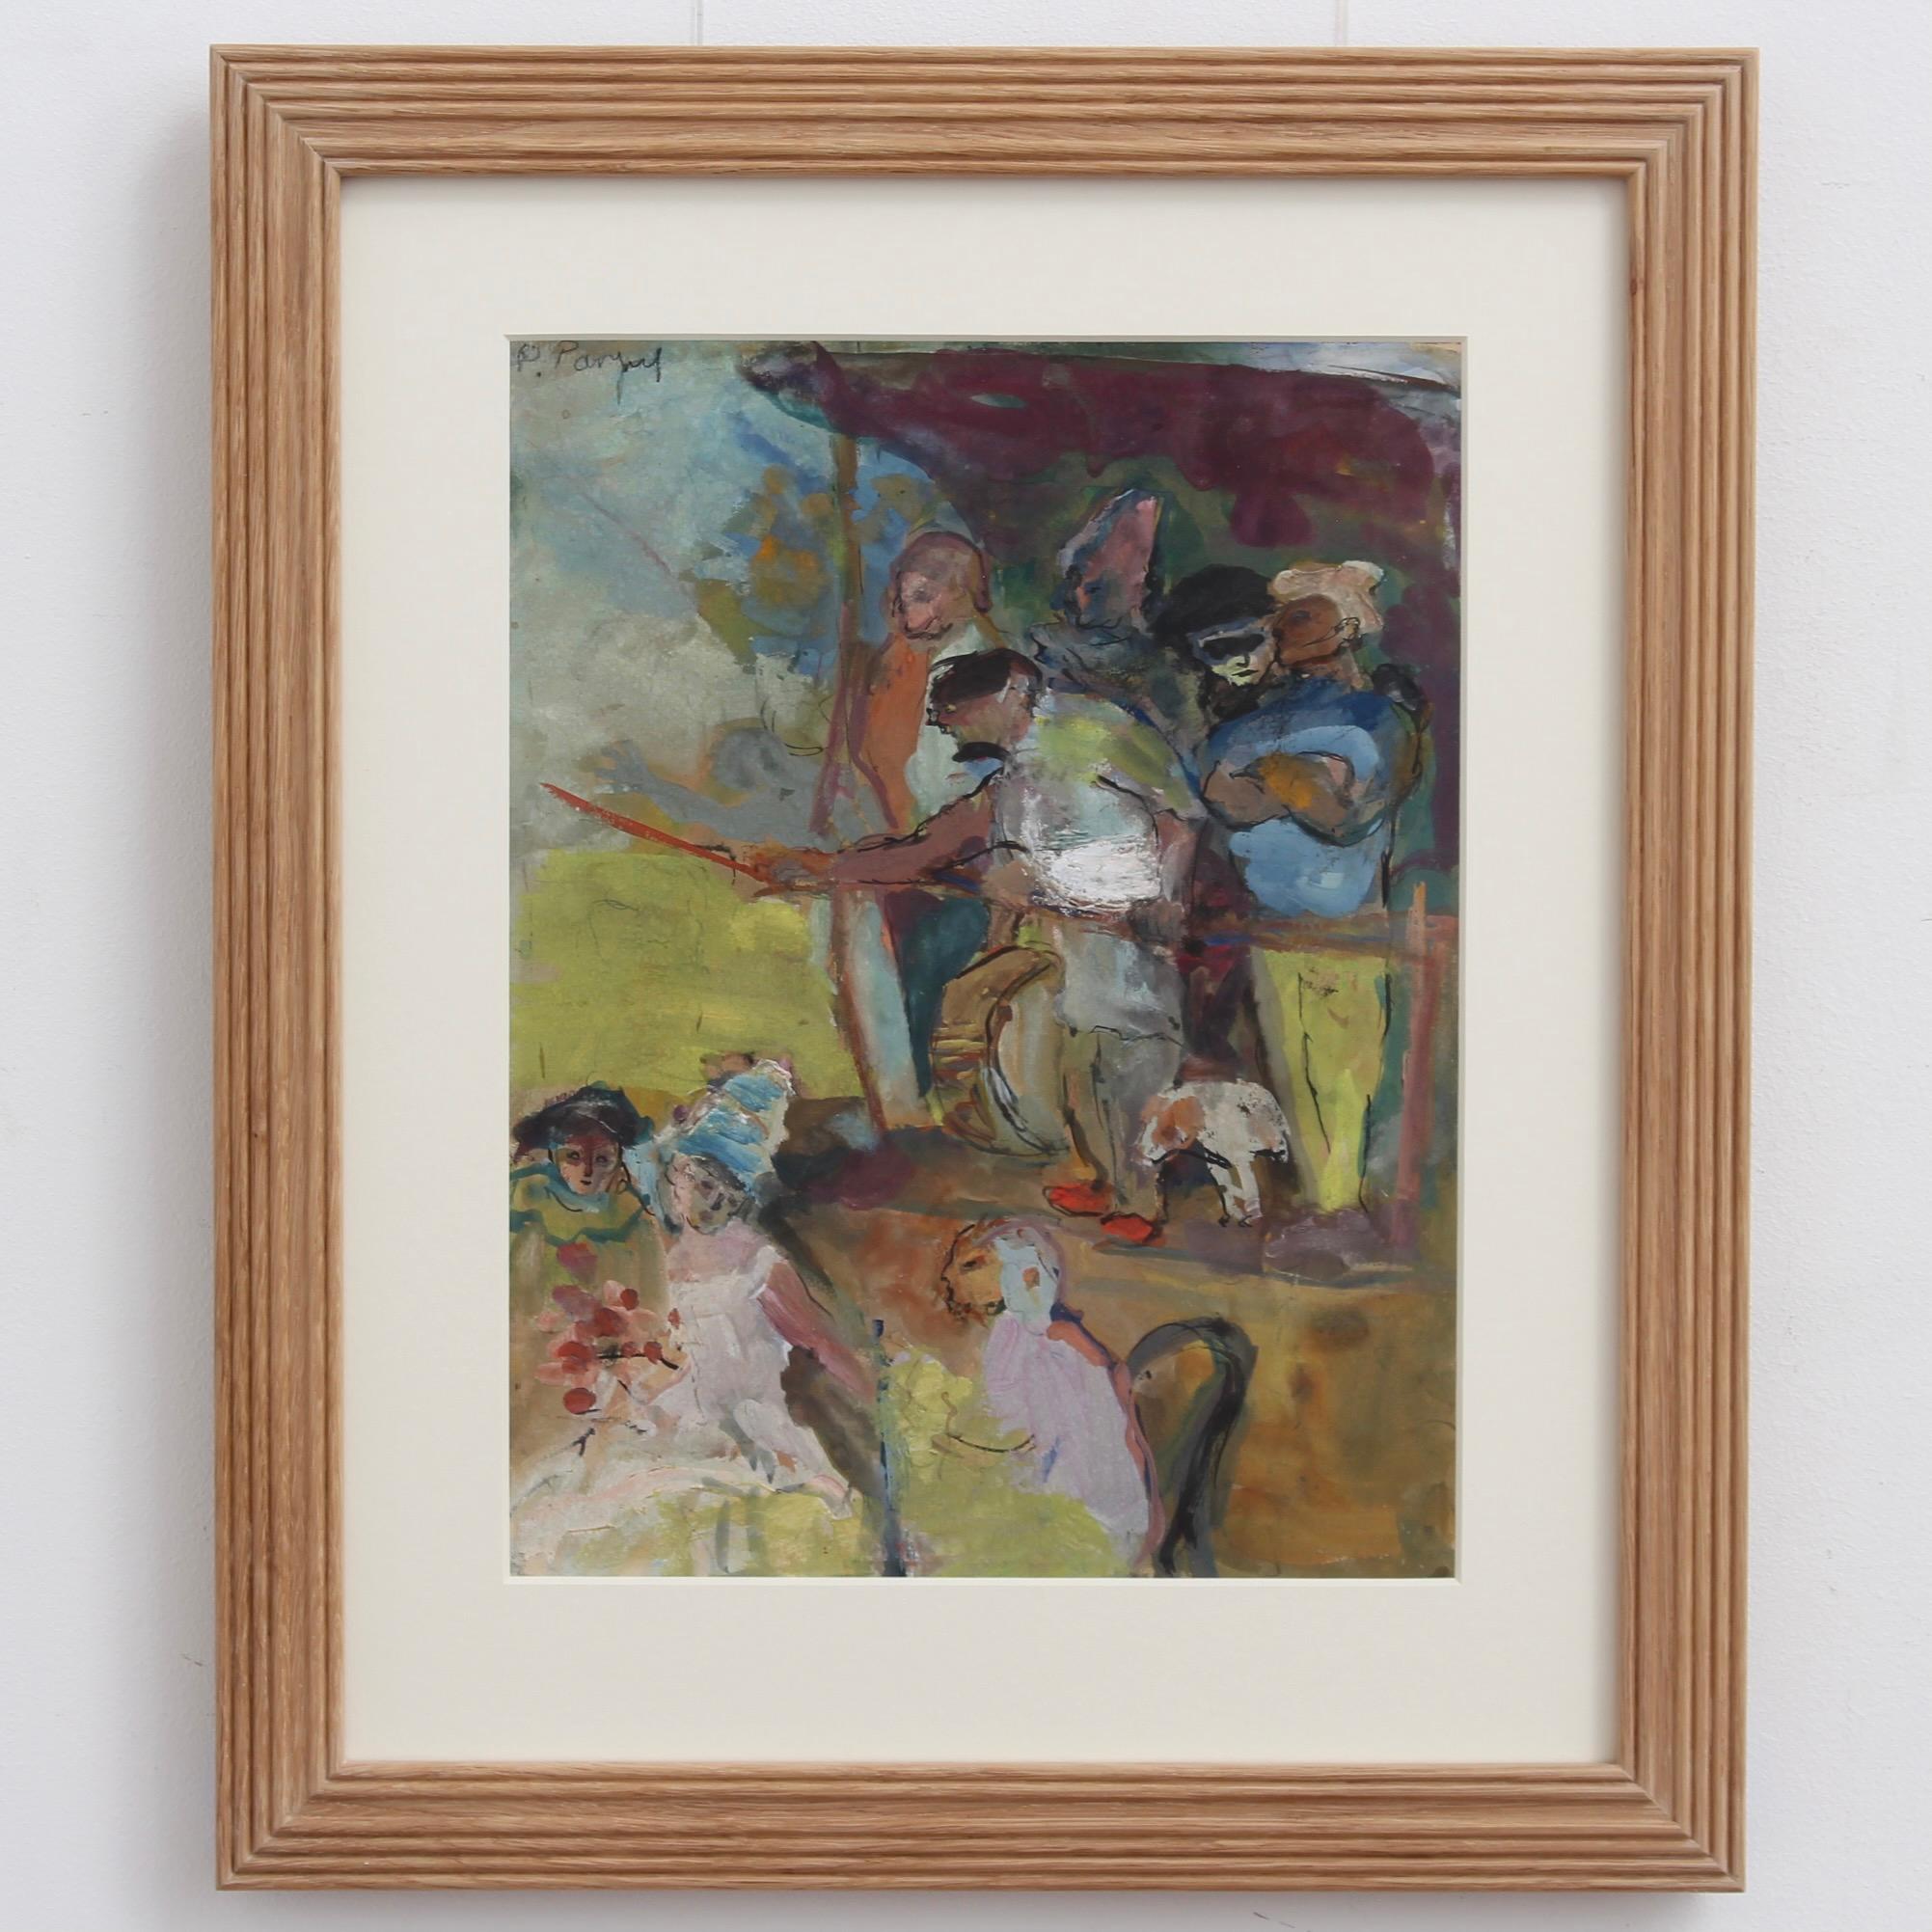 'Theatre in the Park' gouache on art paper, French School (circa 1930s, signature unknown). A charming vignette of costumed performers in an open air theatre delights the viewer. There is something akin to the work of Marc Chagall in this depiction.